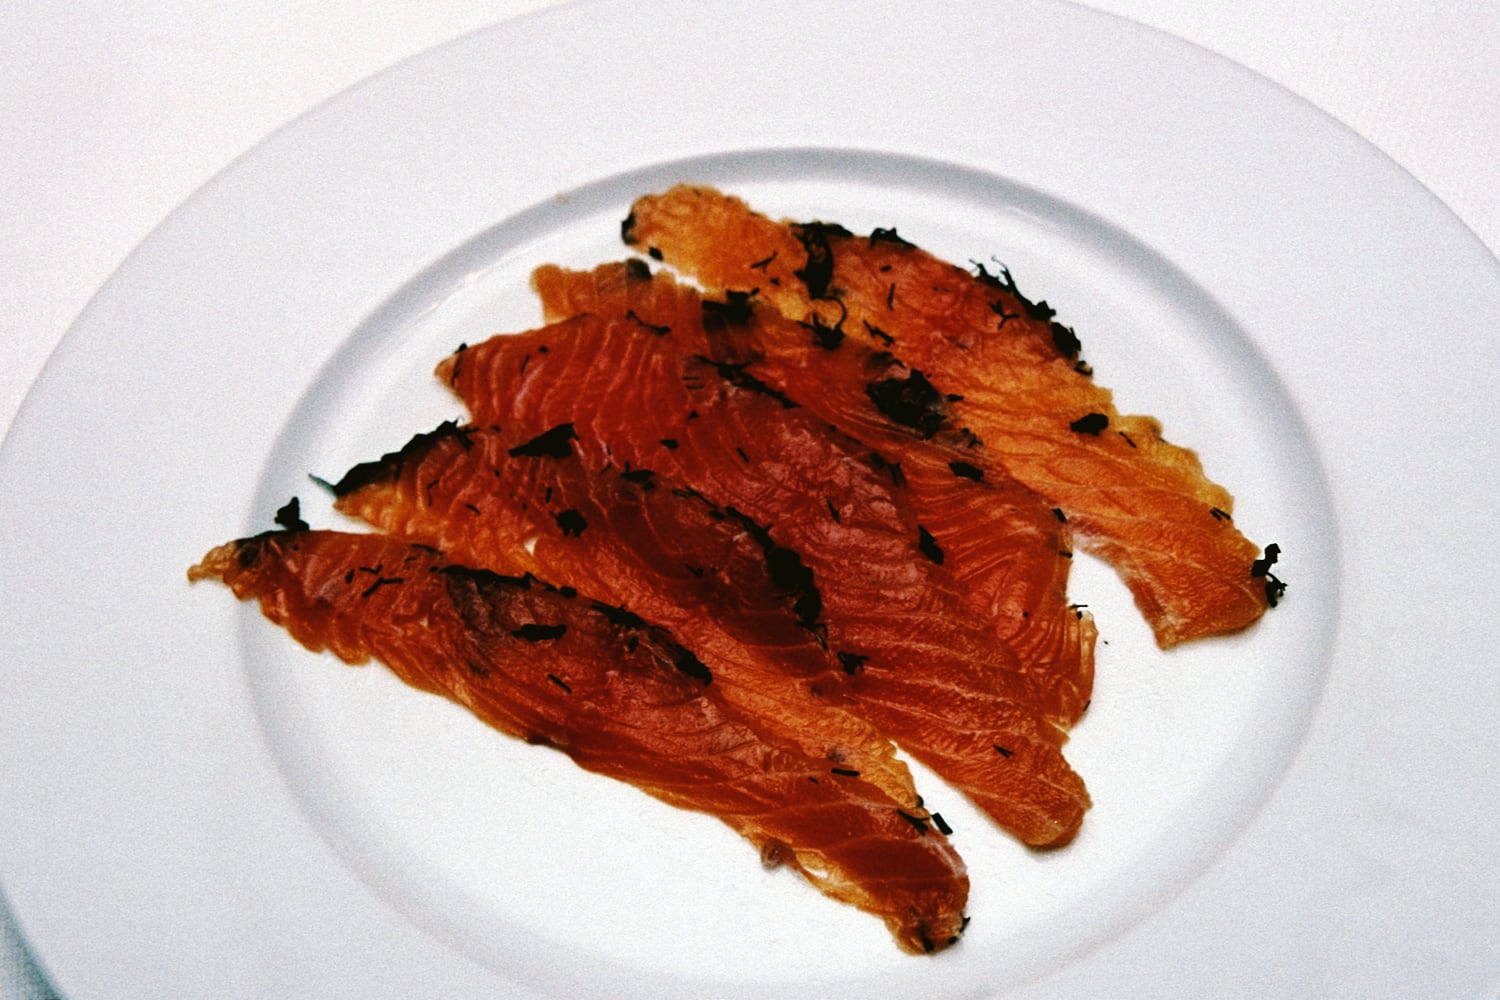 Gravlax, sliced and ready to eat